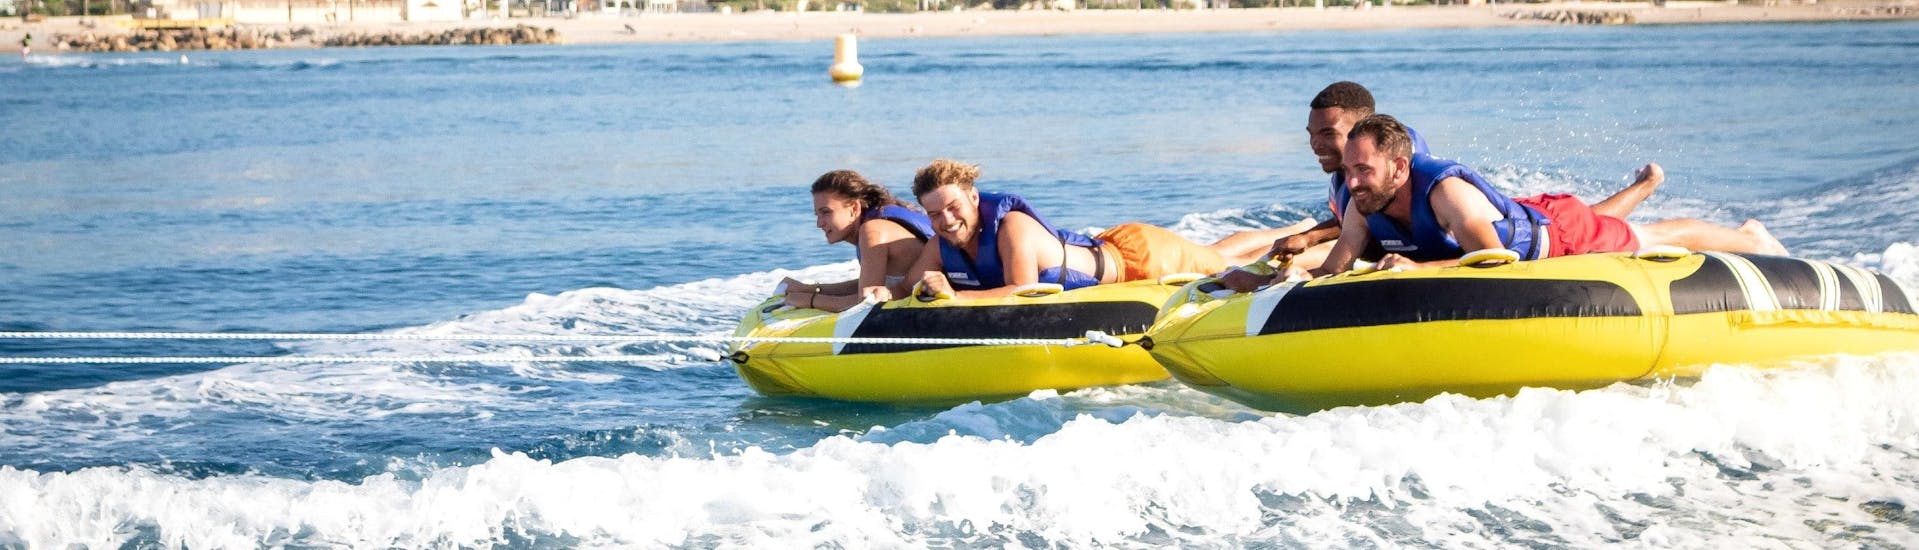 Friends are having fun on their ride with an Sofa Ride and More Towable Tubes in Cagnes-sur-Mer with Cagnes Watersports.